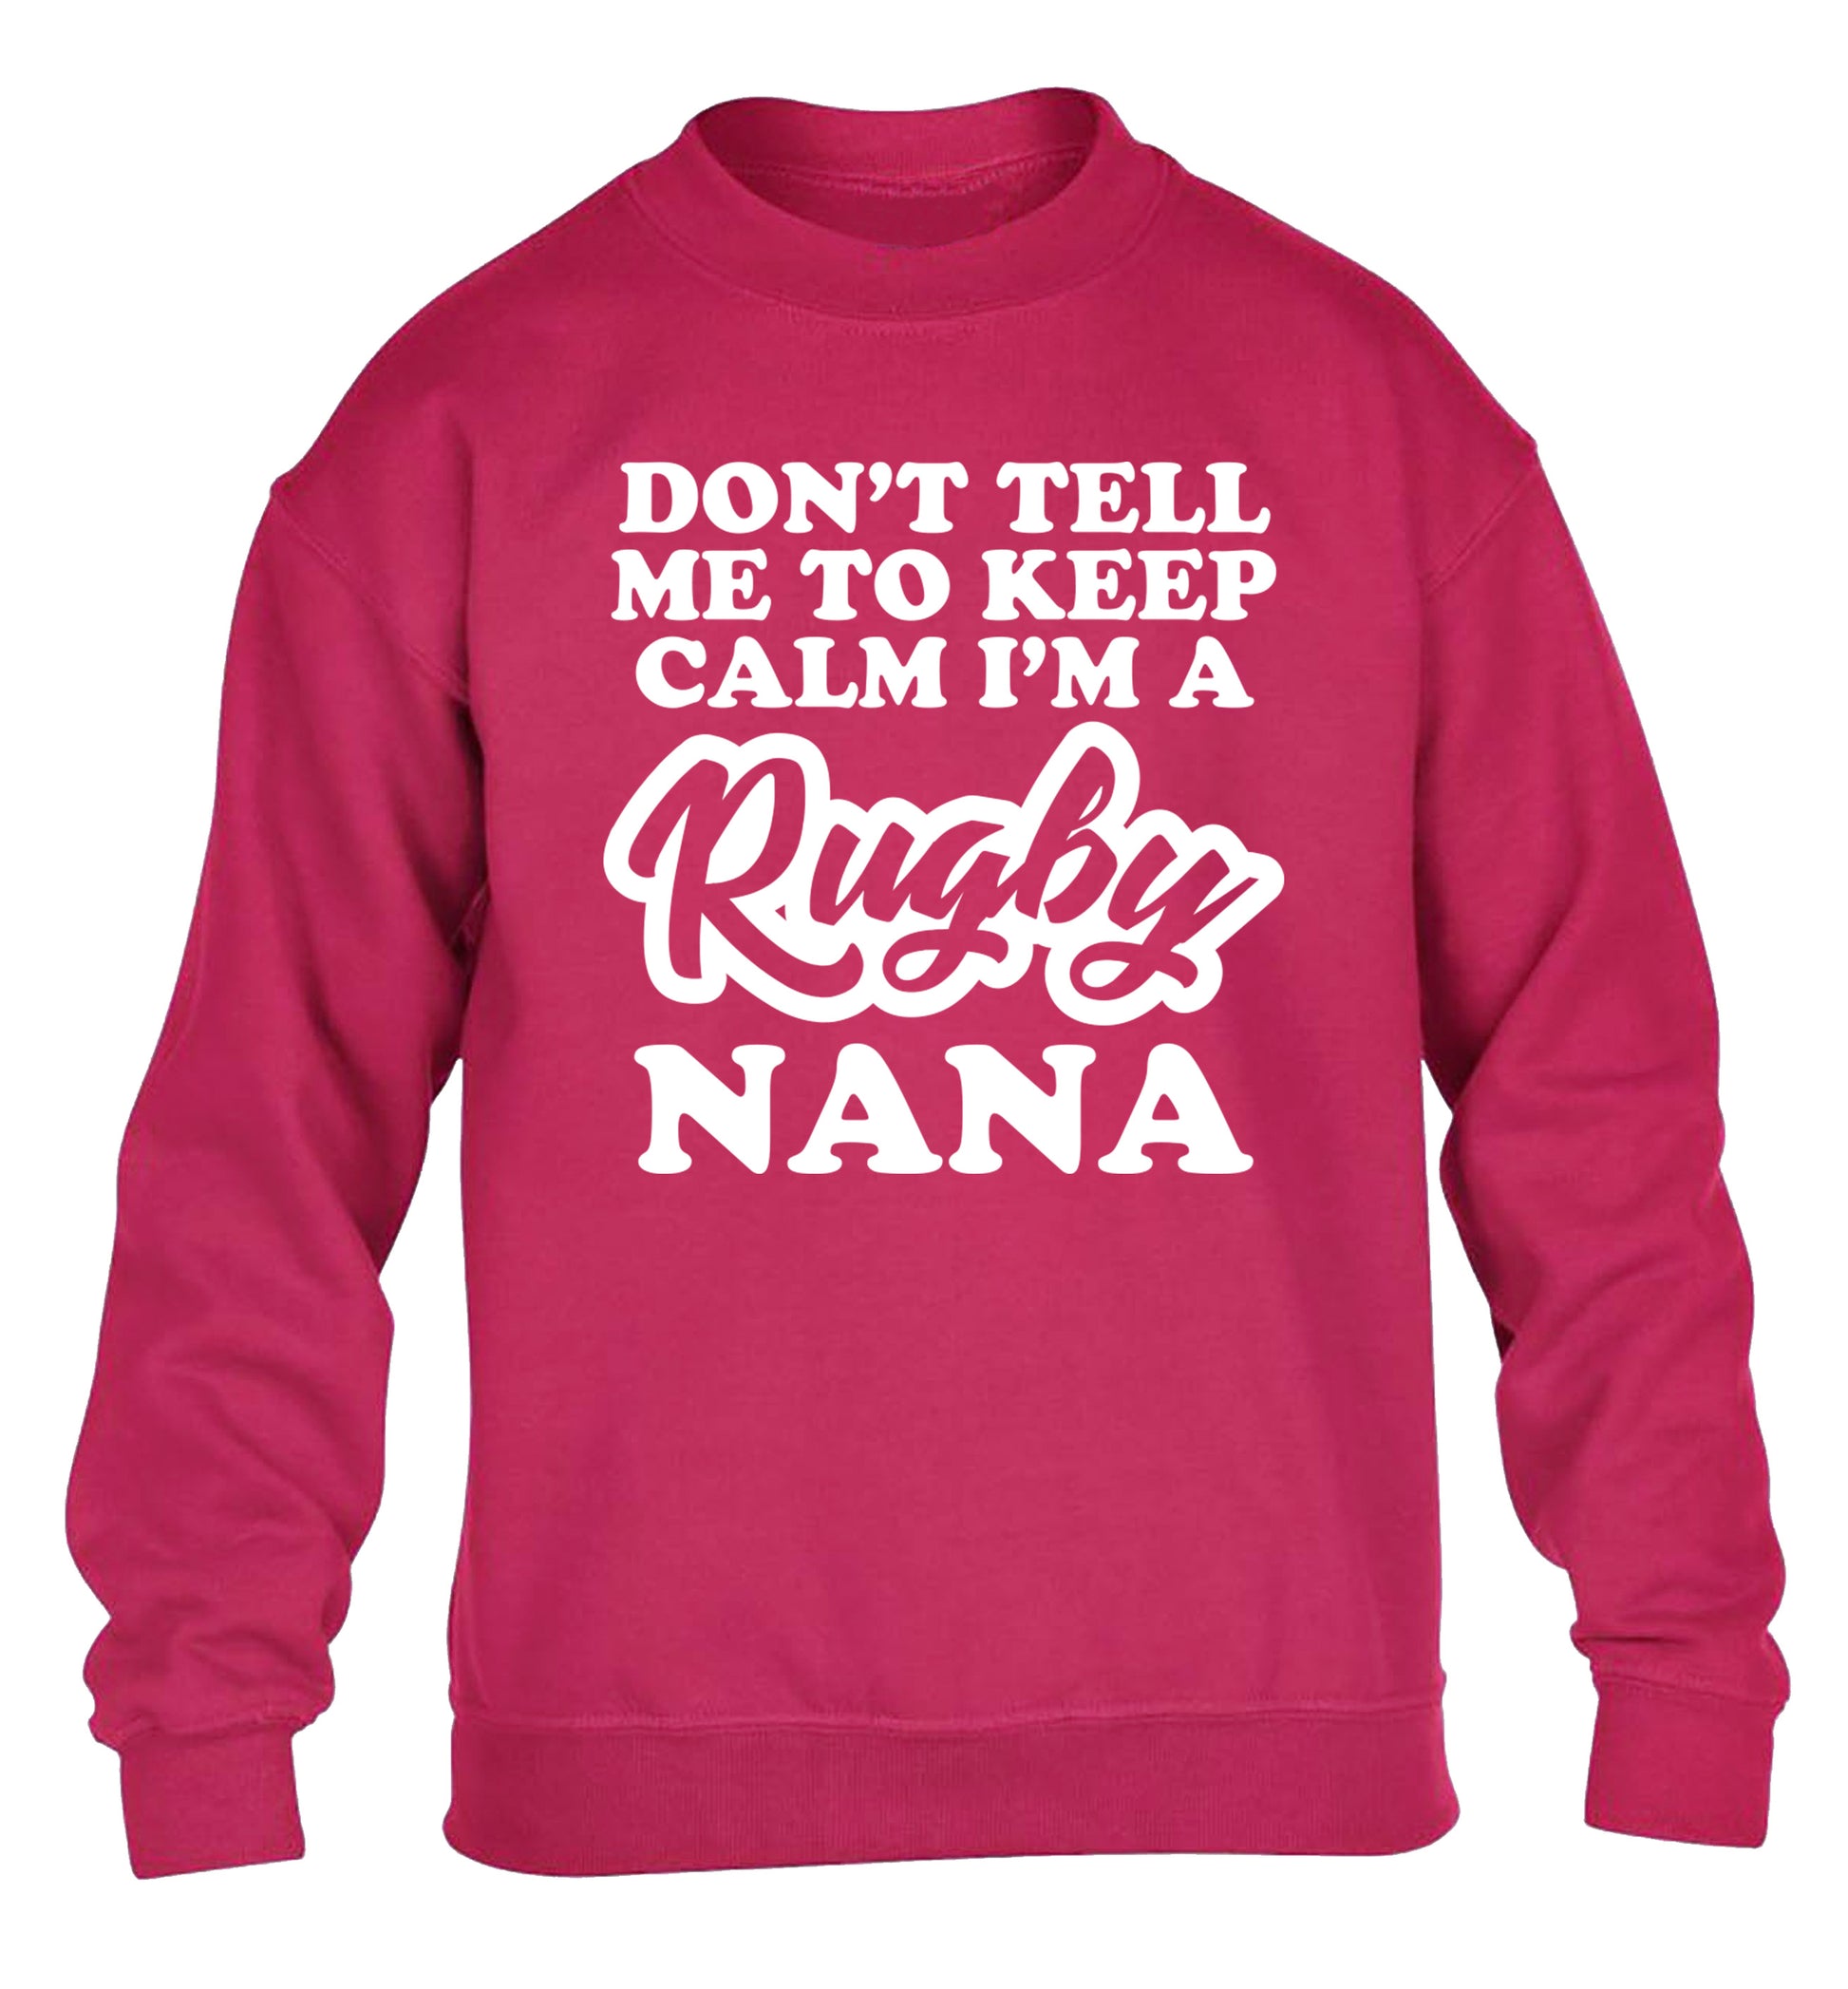 Don't tell me to keep calm I'm a rugby nana children's pink sweater 12-13 Years